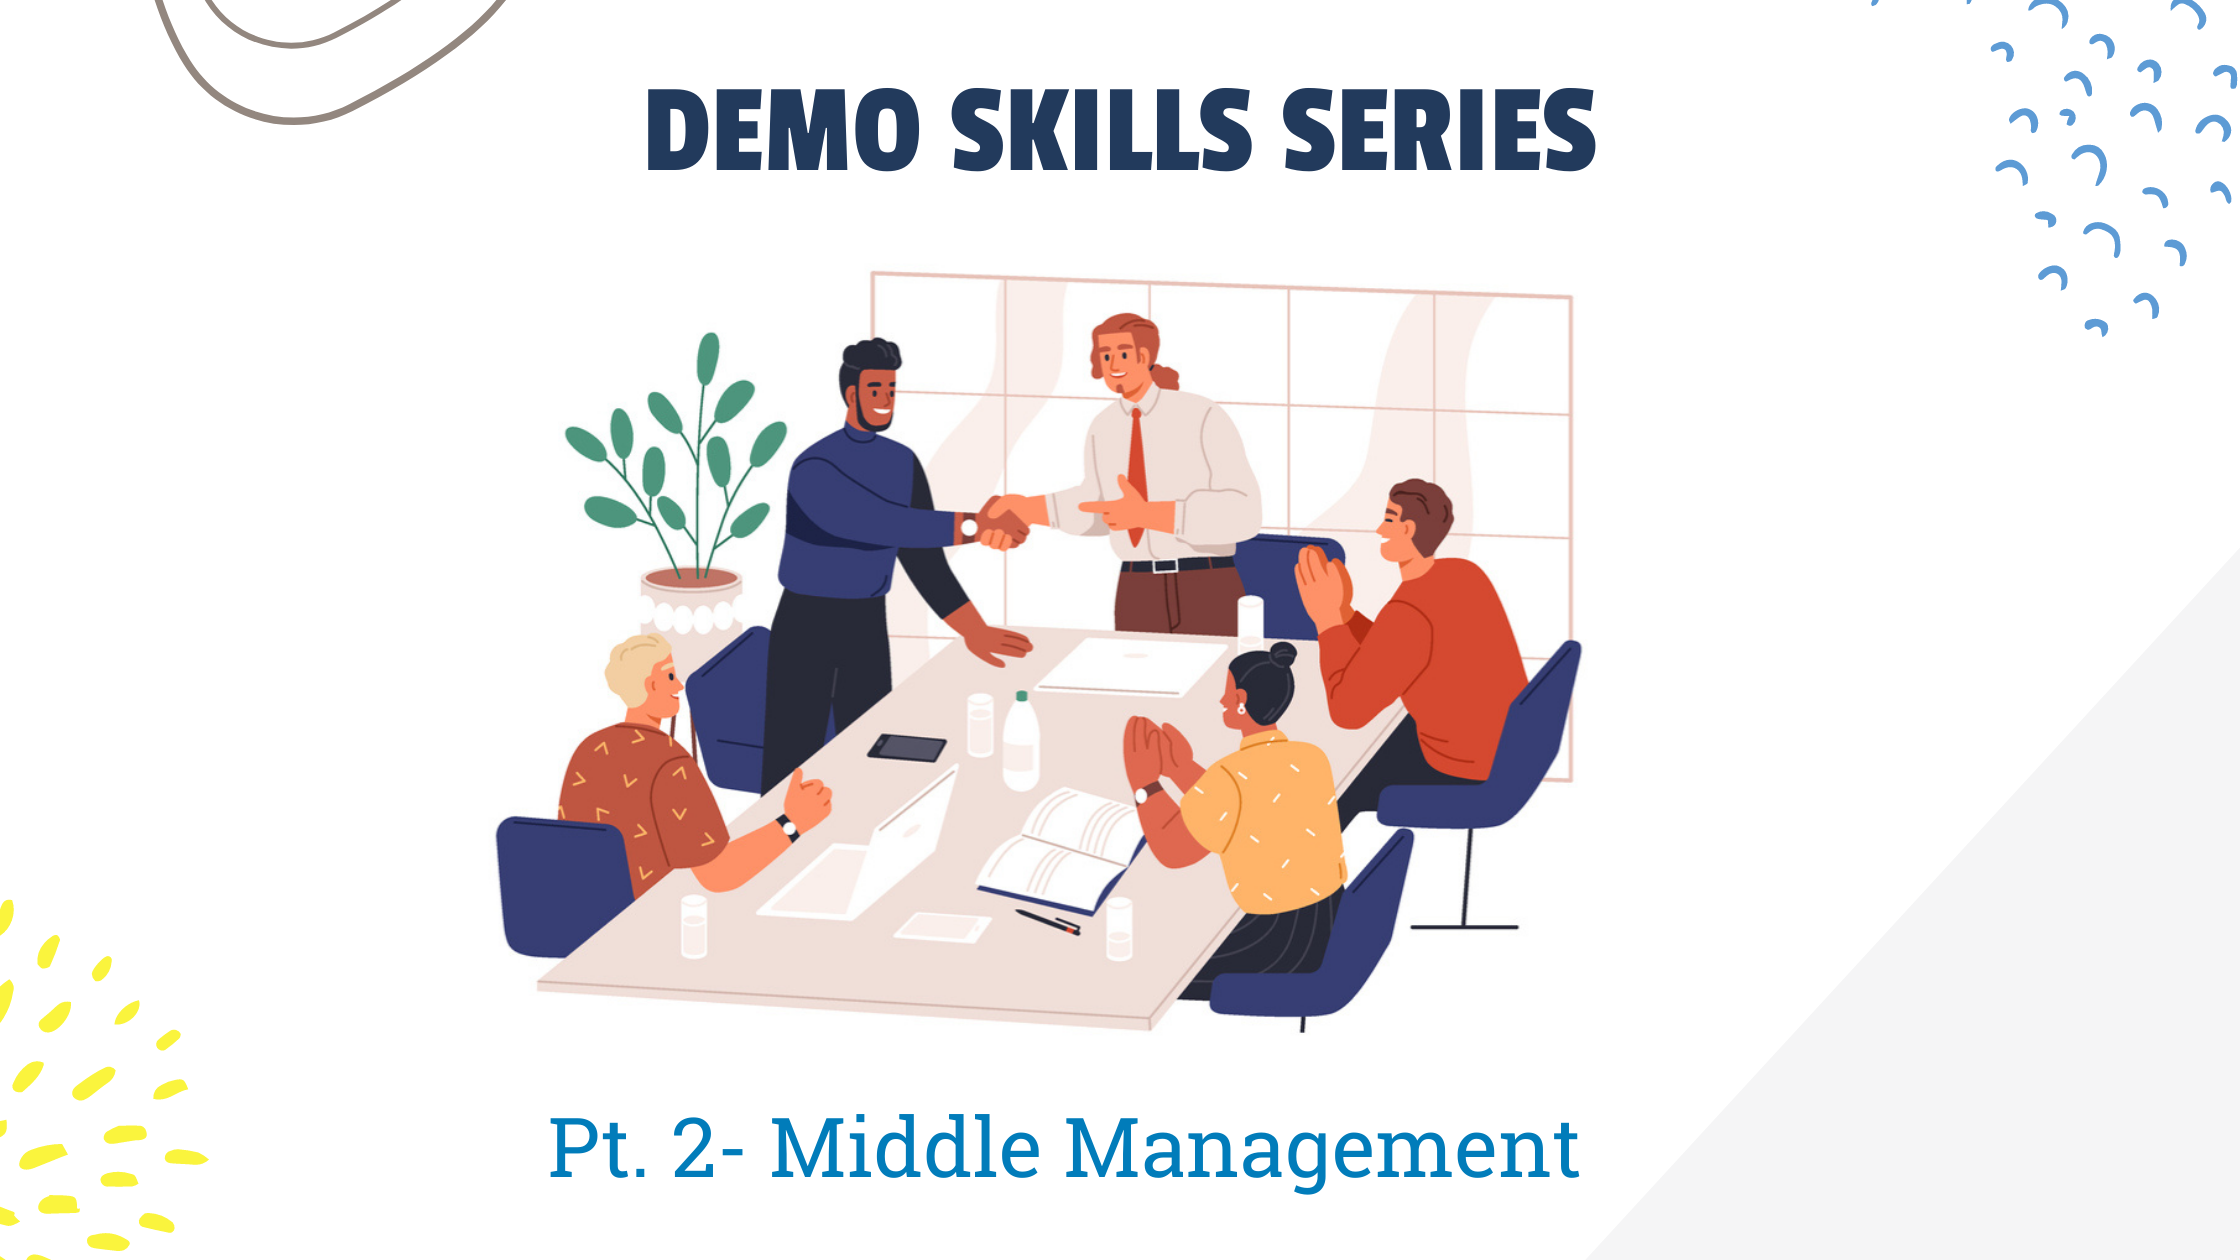 DEMO SKILLS SERIES- Middle Management